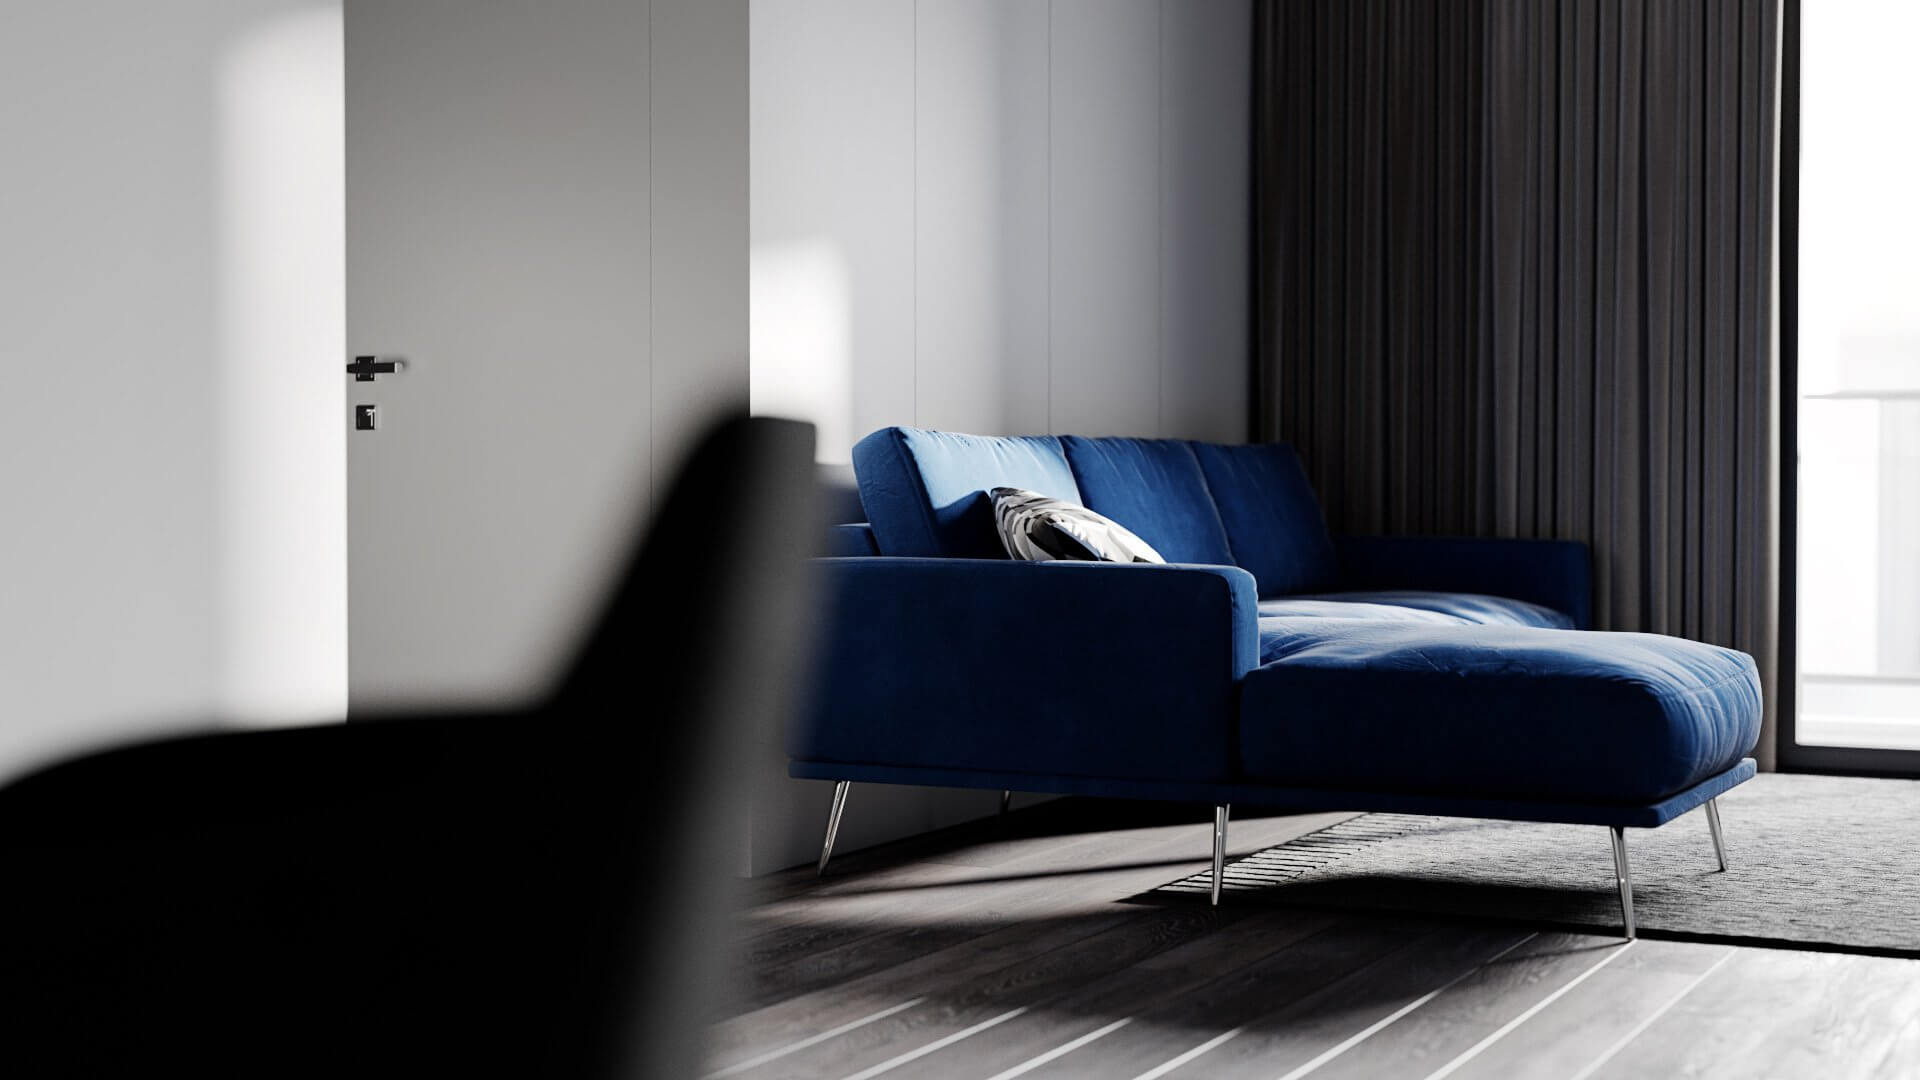 Classic and clean apartment living room couch blue velvet 2 - cgi visualization